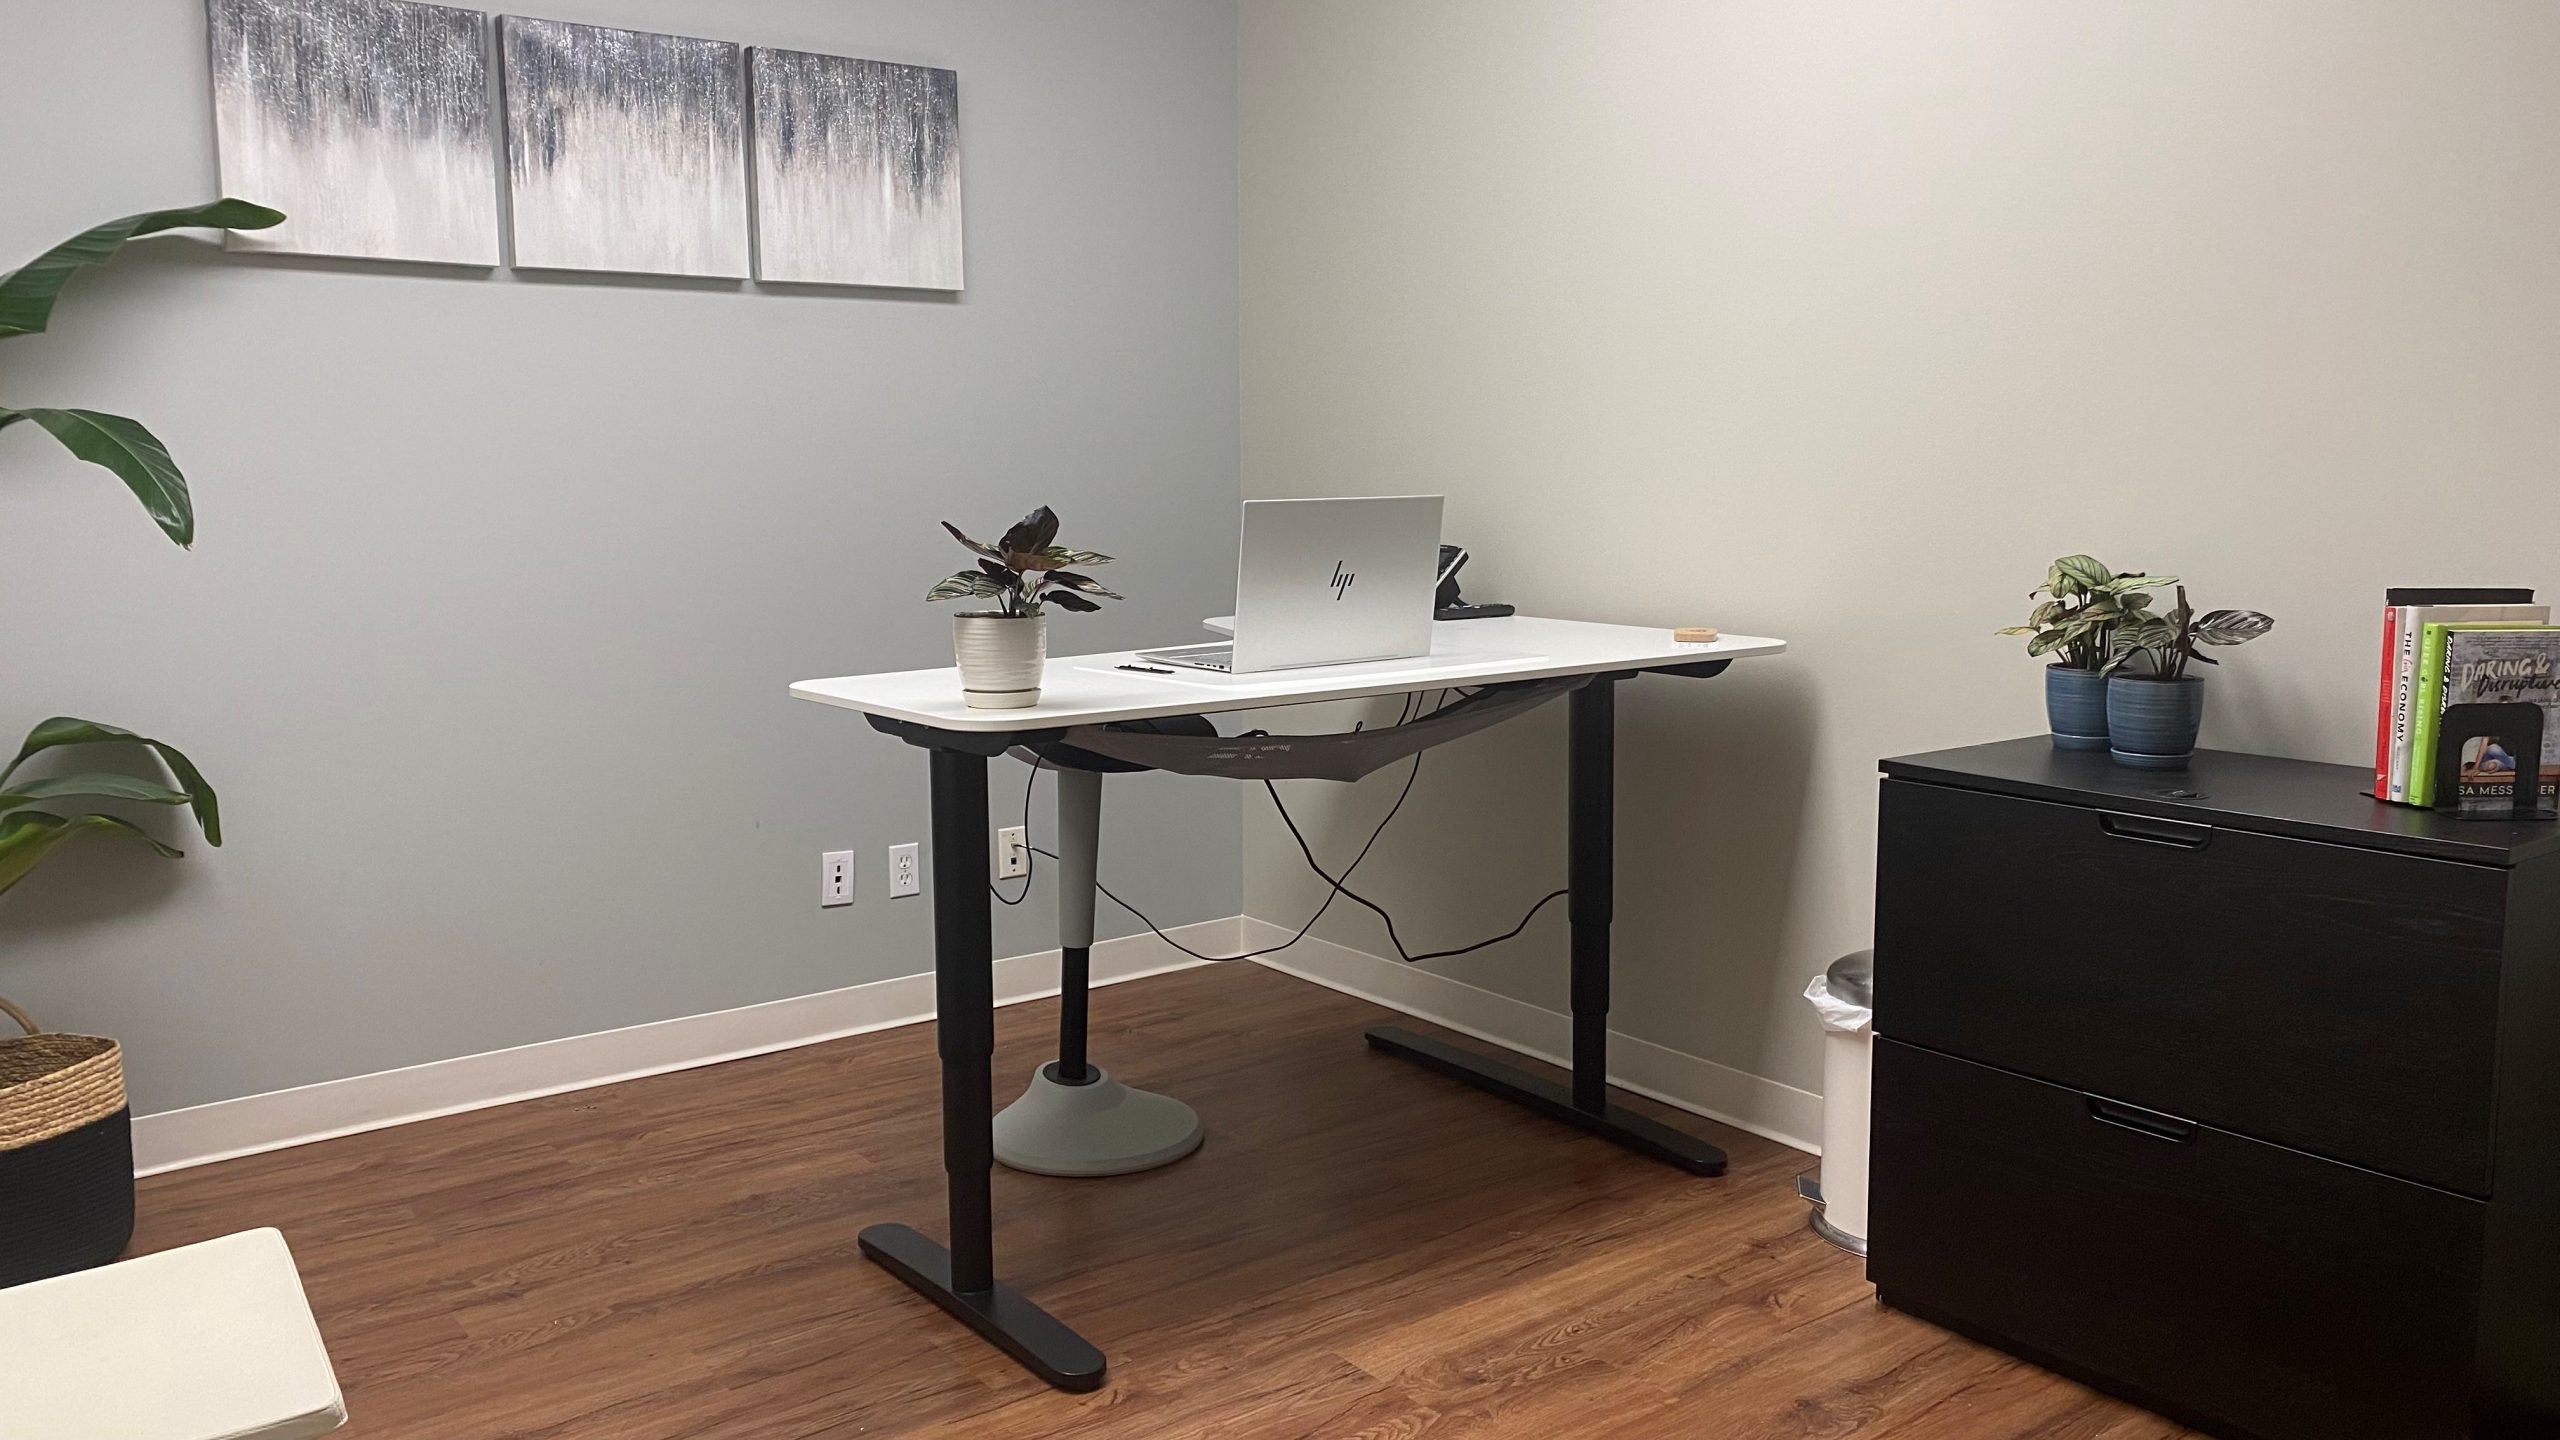 Co-office equipt with a sit/stand ergonomic desk, filing cabinet, phone, and video conferencing screens. 32in video conferencing screens, phones, a filing cabinet, and sit/stand ergonomic desks for your physical well-being.